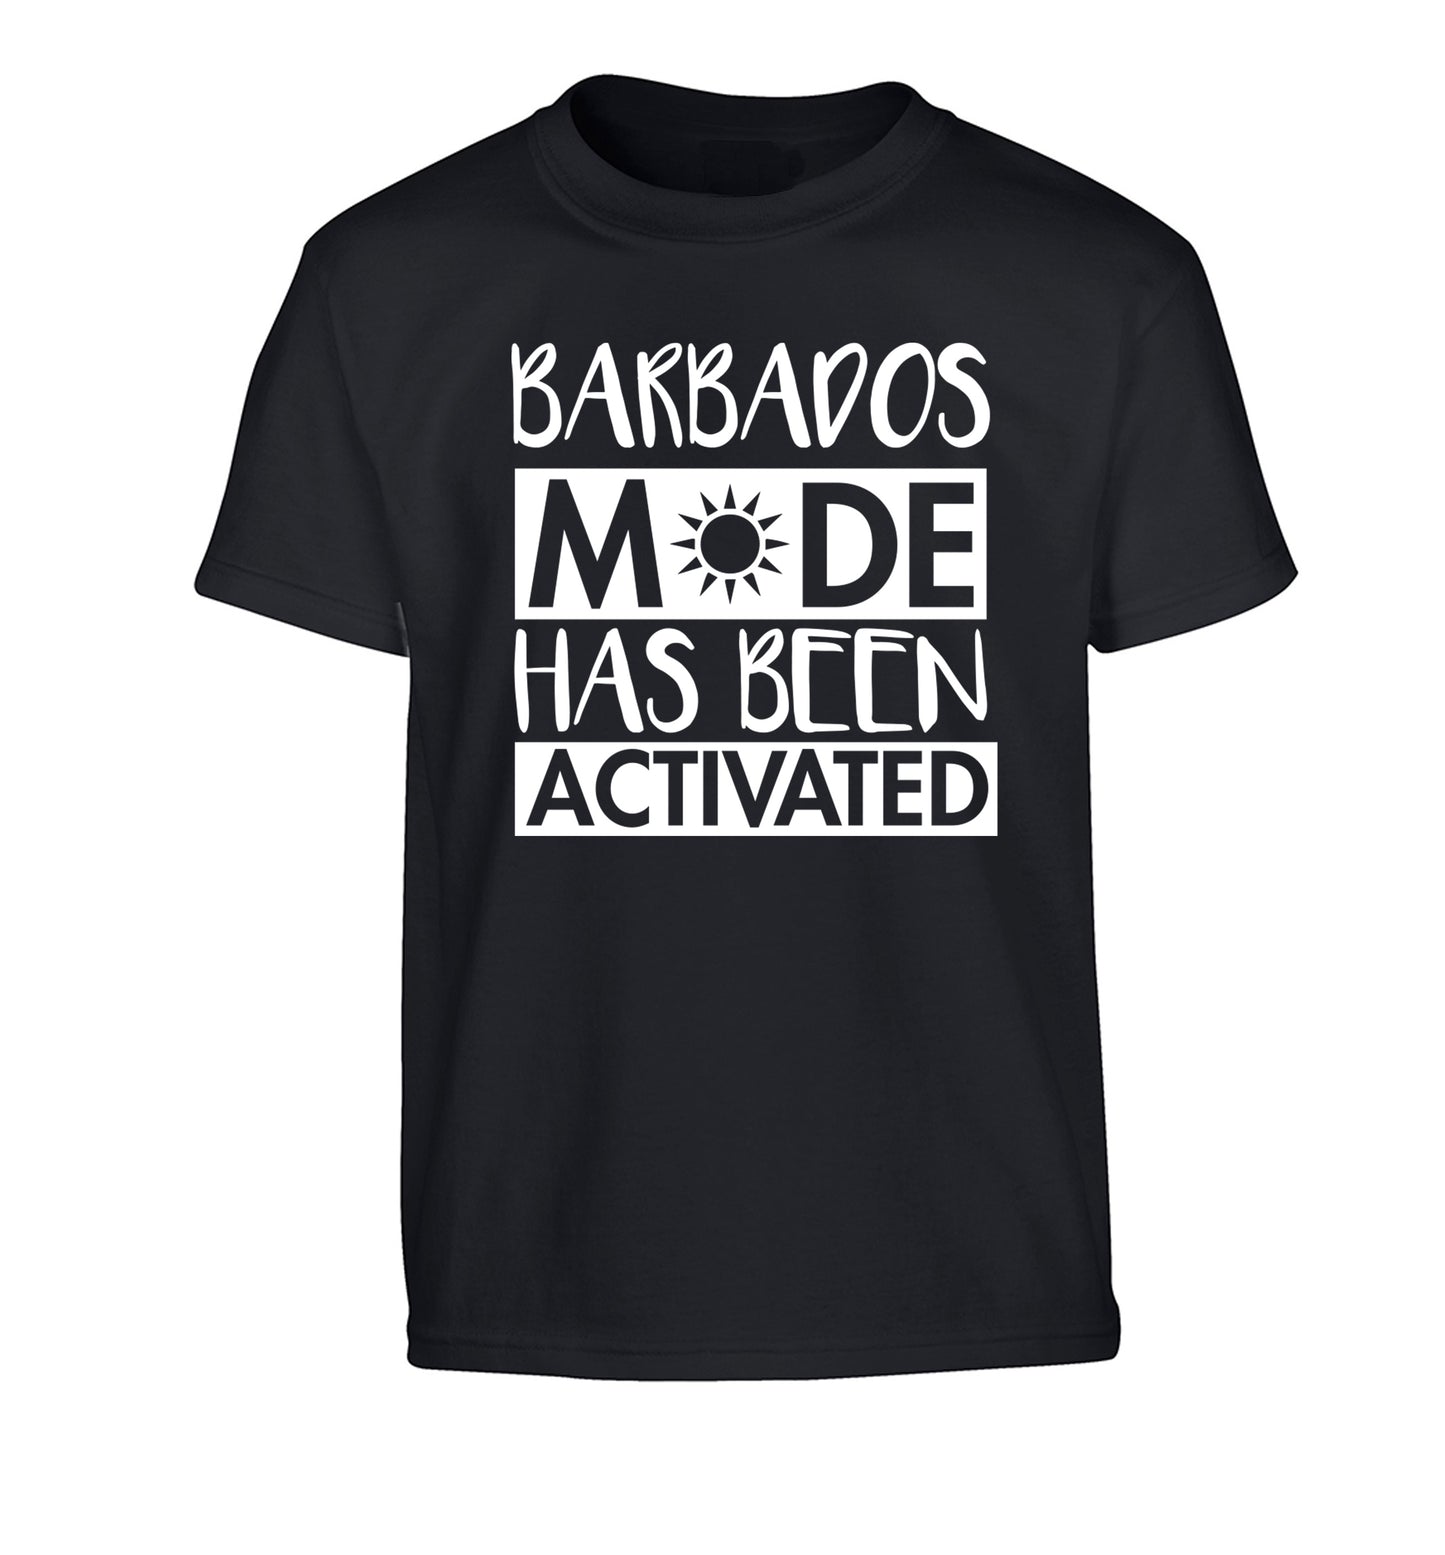 Barbados mode has been activated Children's black Tshirt 12-13 Years